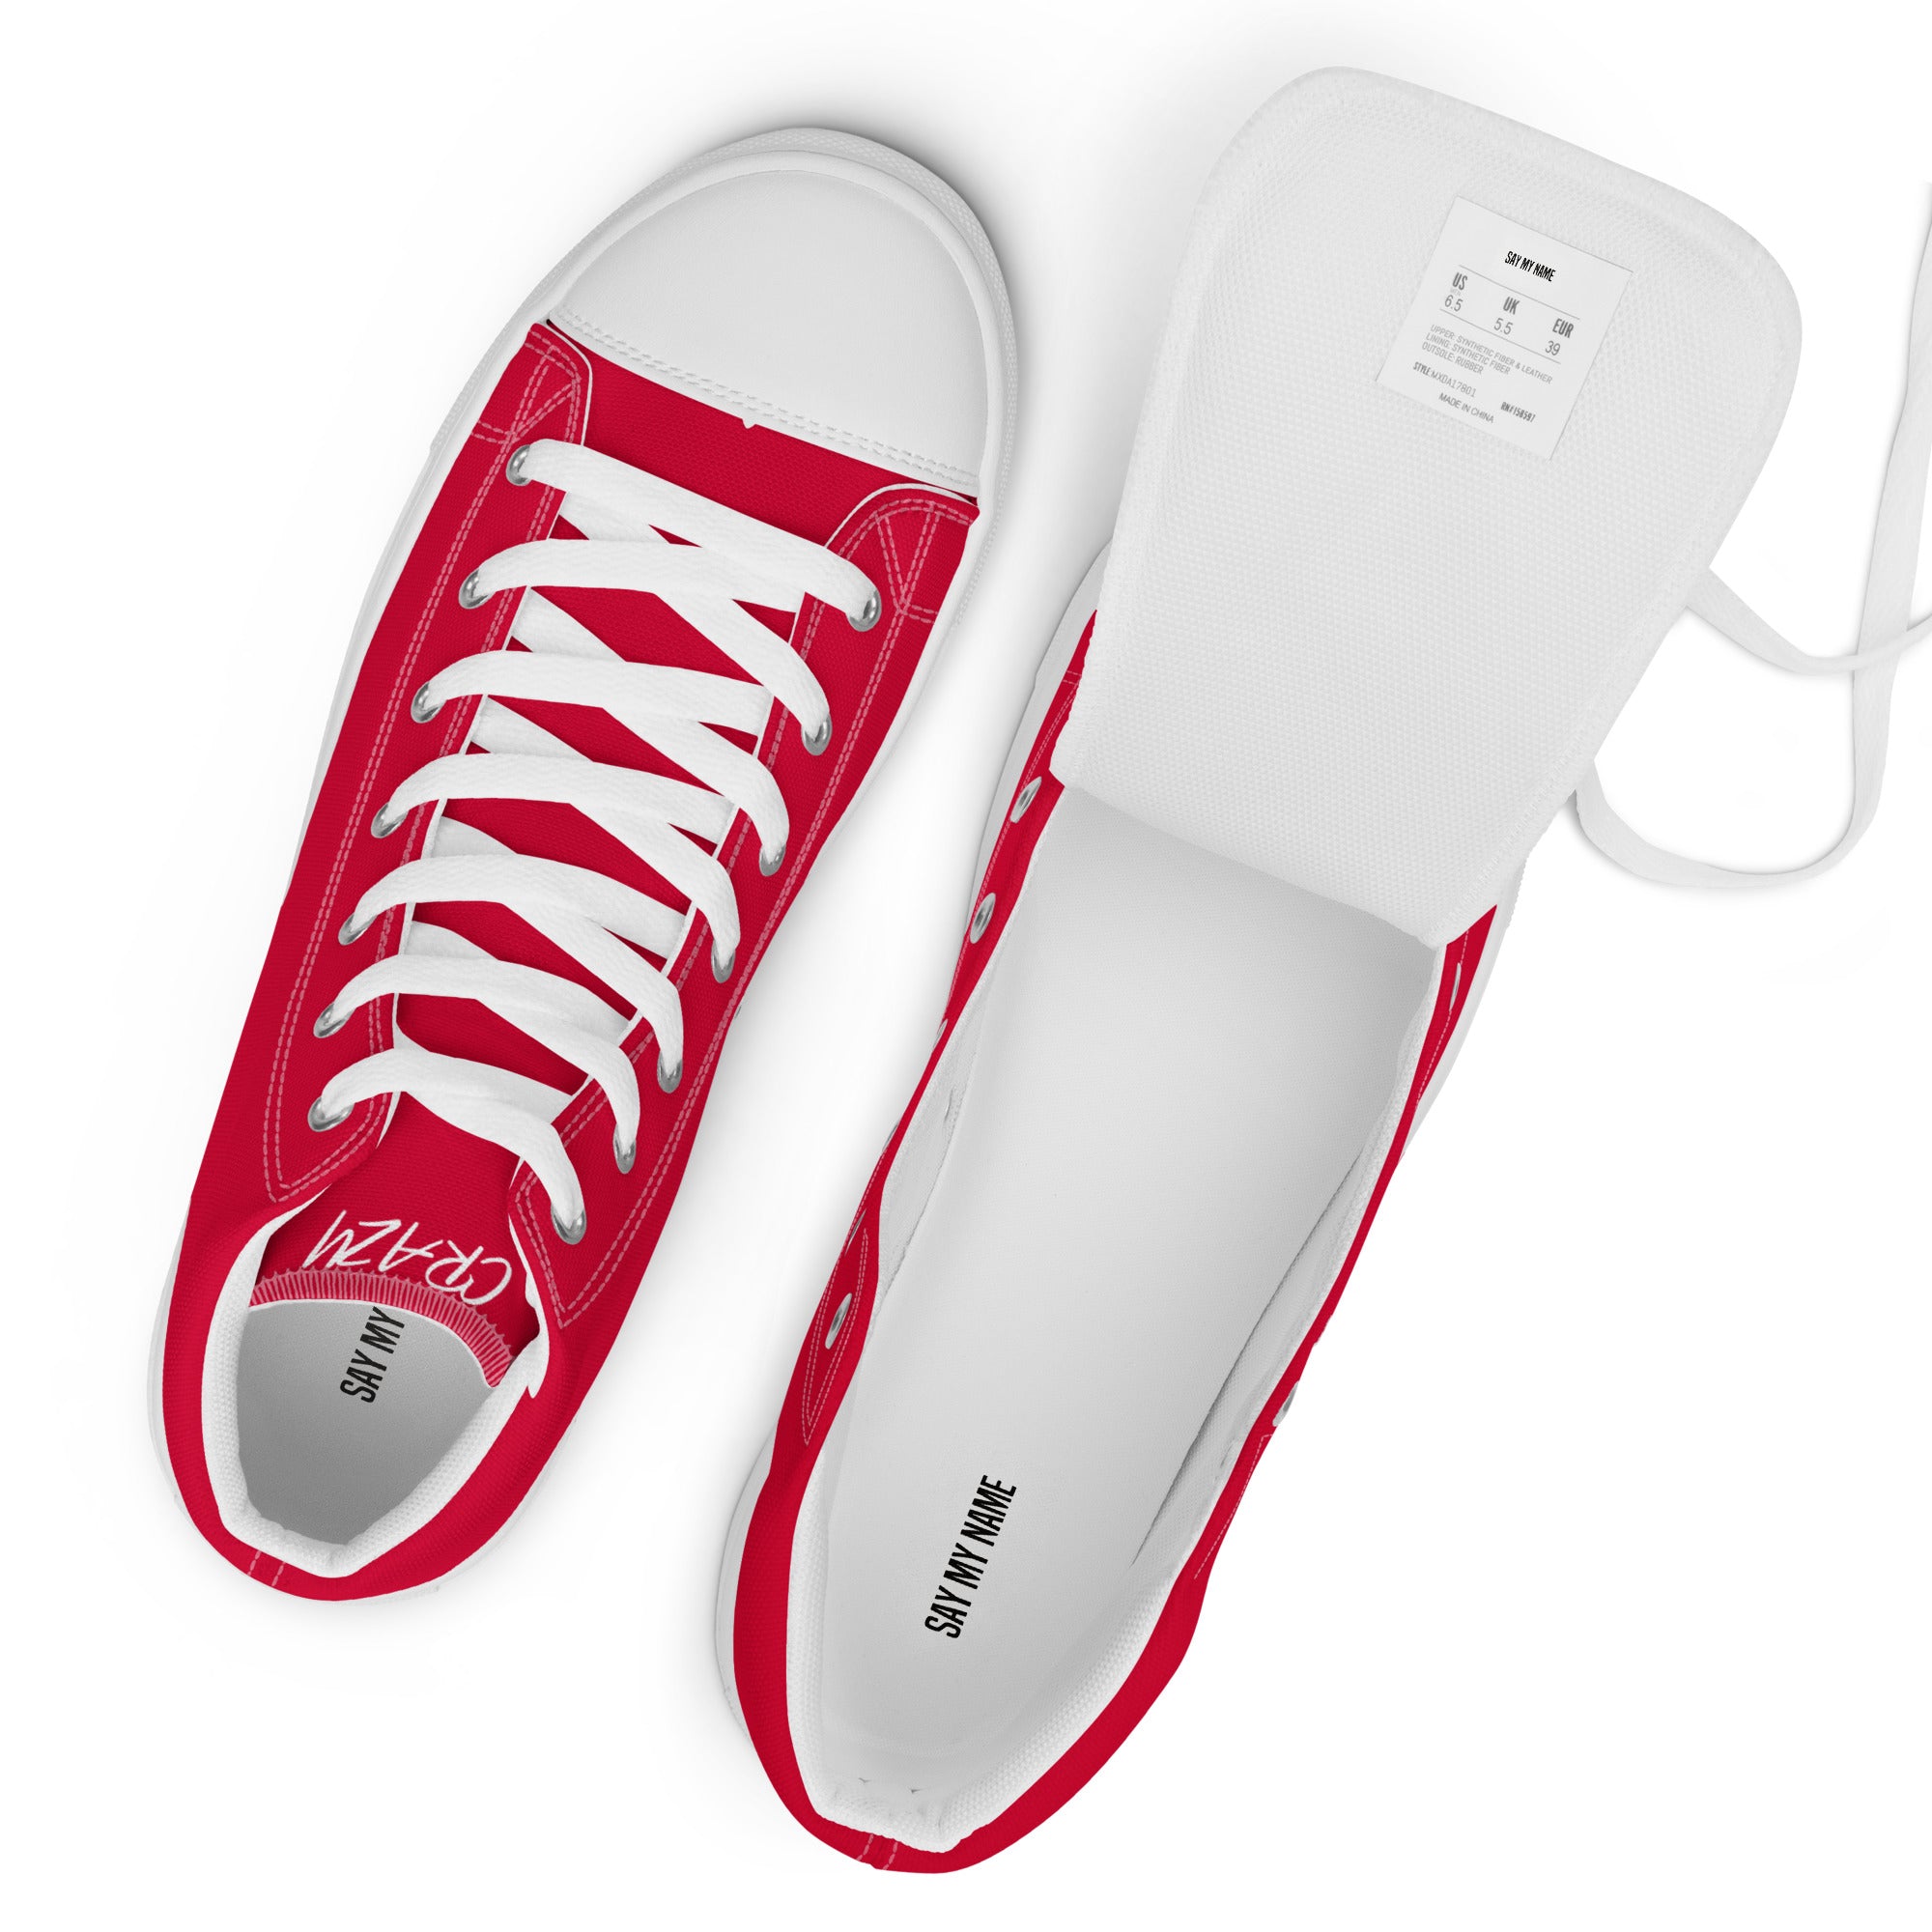 "SAY MY NAME" men's high red canvas sneakers